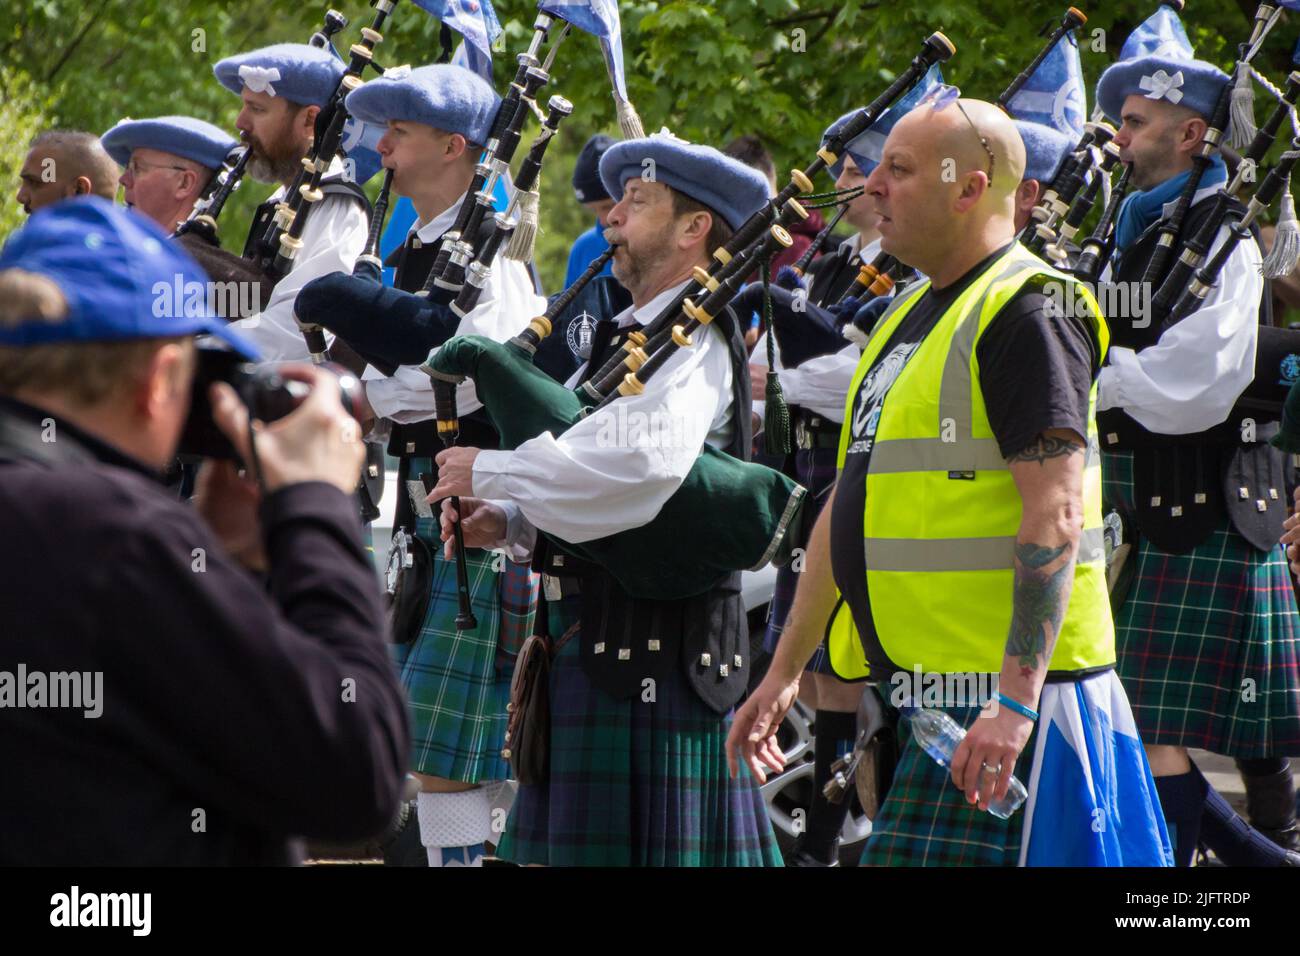 March for Independent Scotland, Bag Pipes Players in Kilt in Crowd Stock Photo